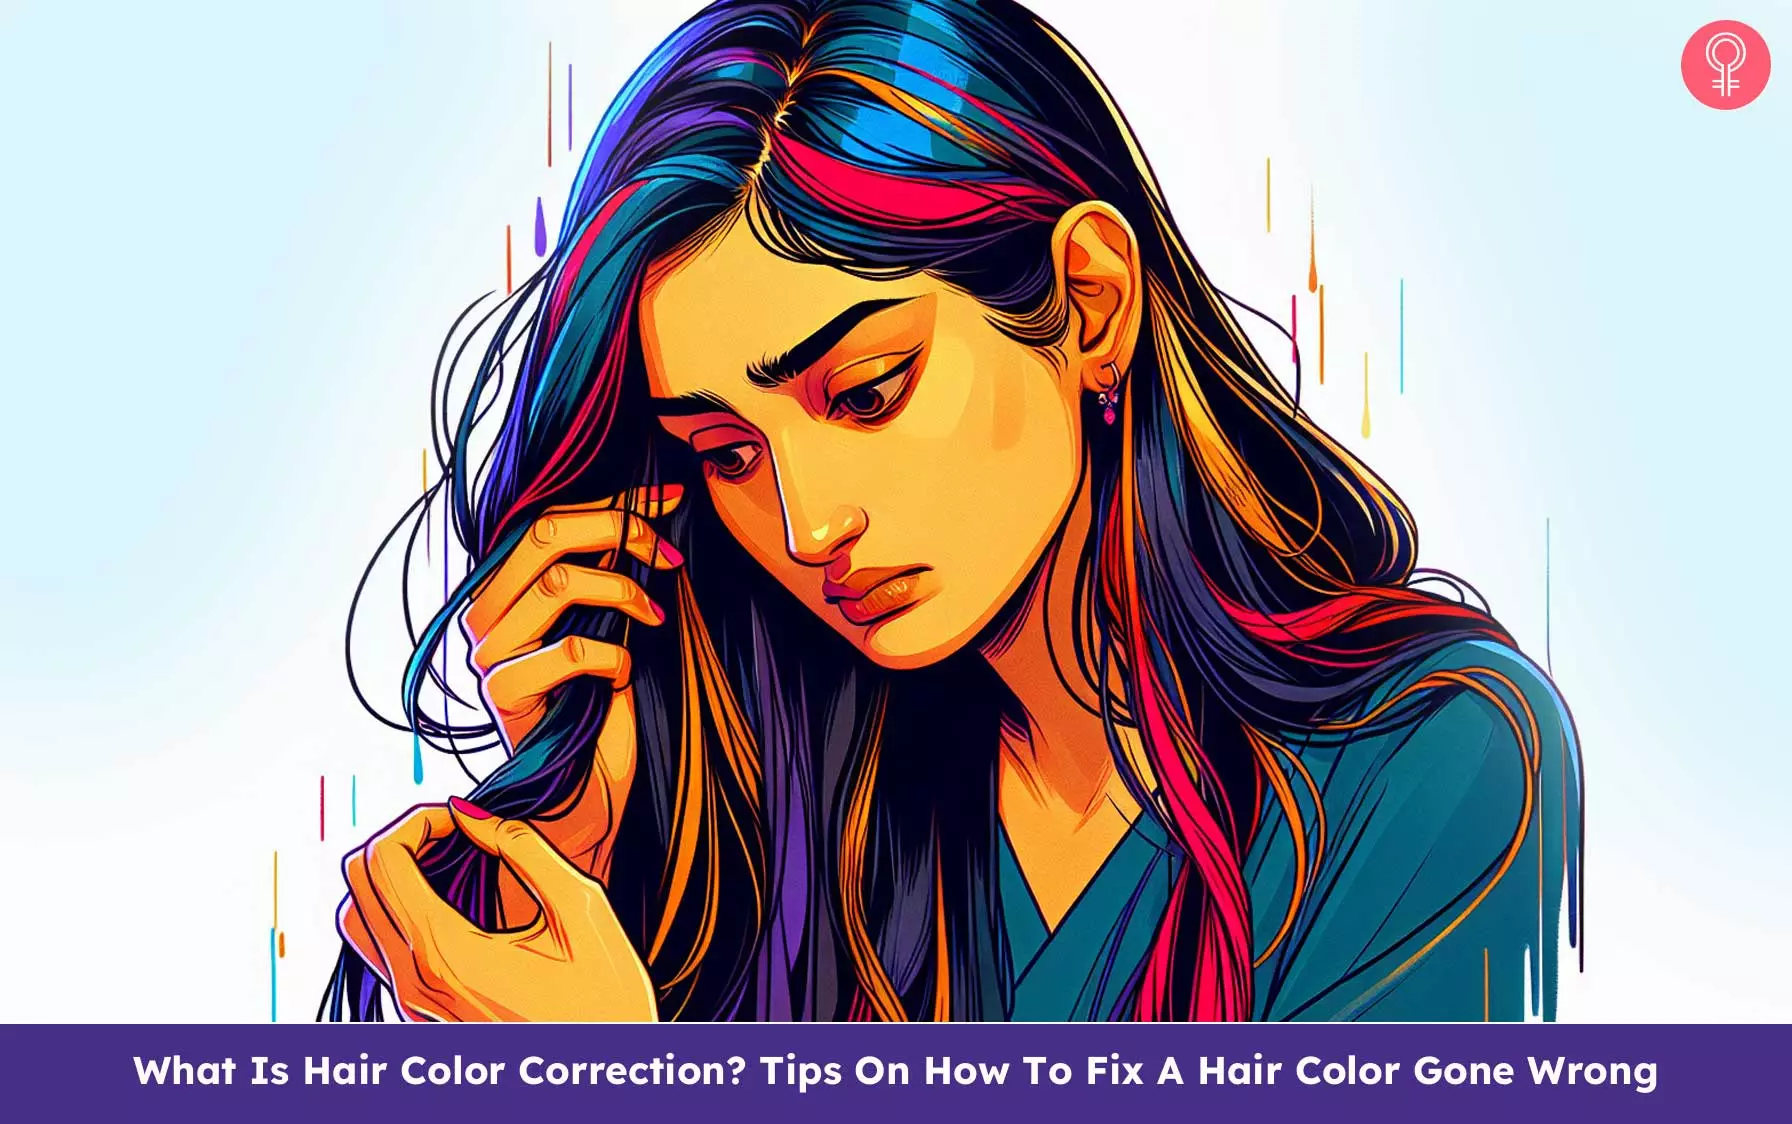 What Is Hair Color Correction? Tips On How To Fix A Hair Color Gone Wrong